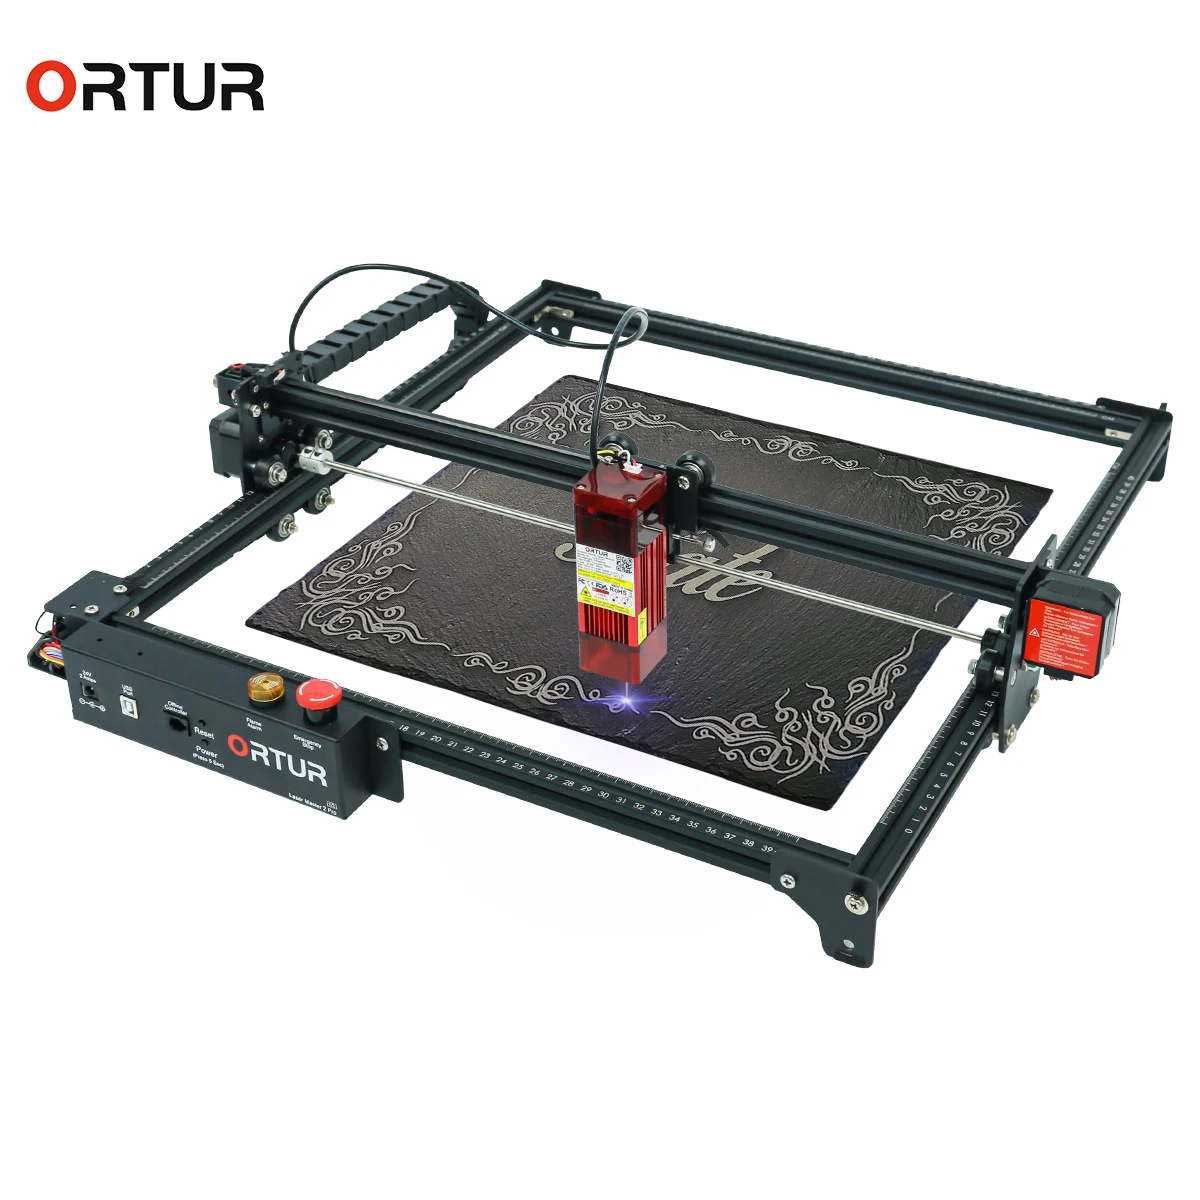 

Ortur Cnc Router LaserGRBL Diy Use Stainless Steel Laser Engraving Wood Cutting And Graving Dog Tag Cutter Engraver Machine